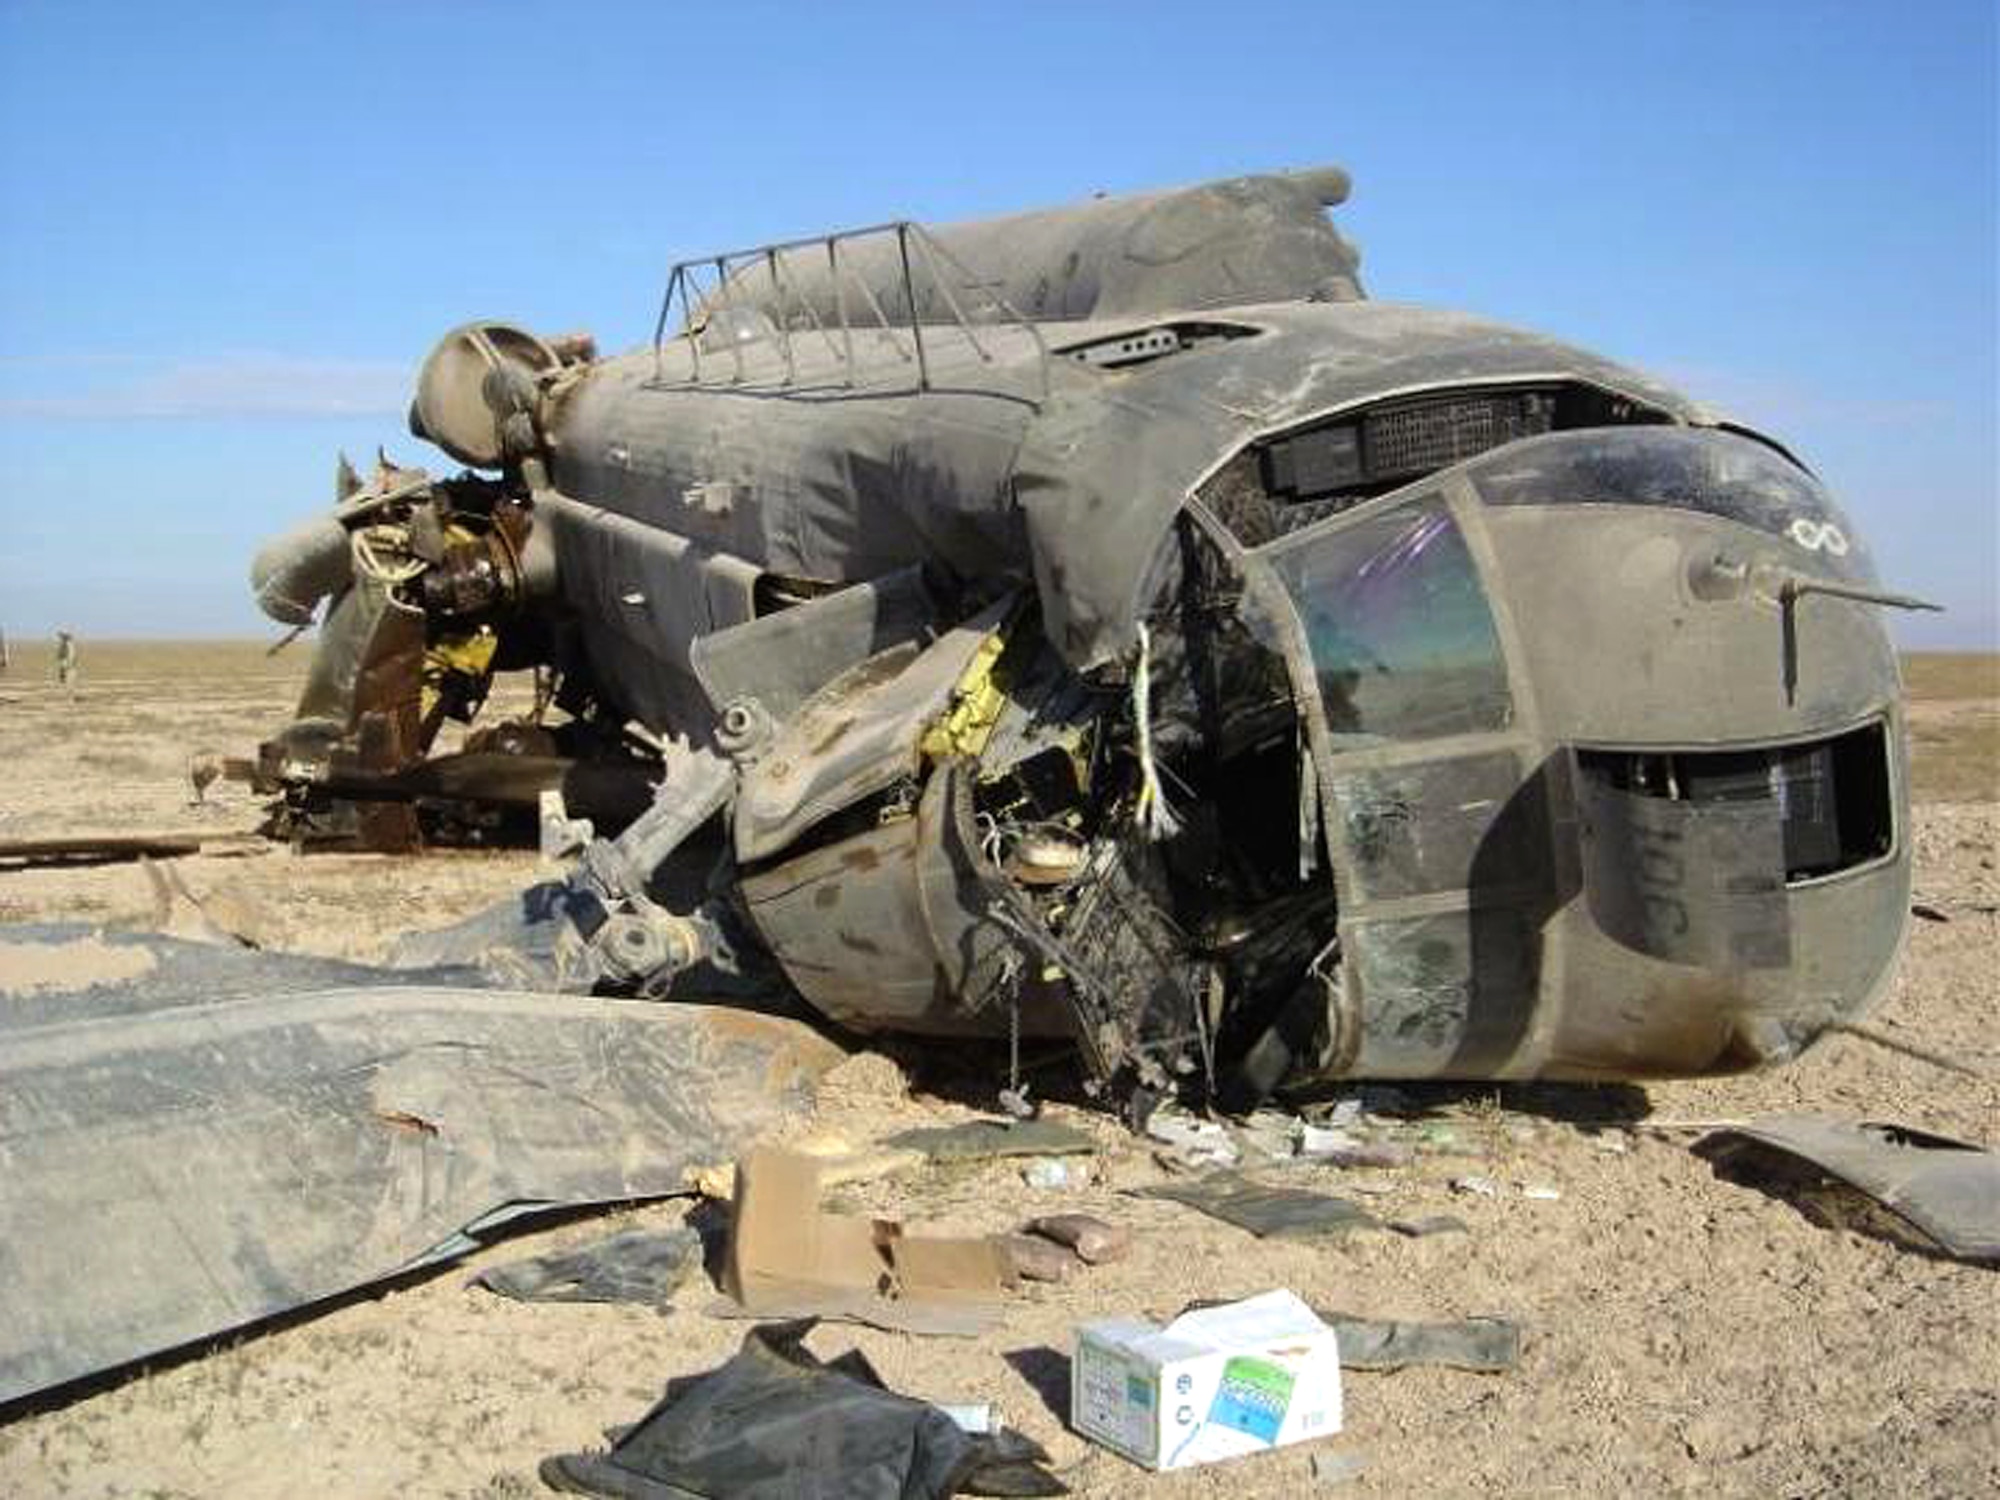 IRAQ (AFPN) -- The wreckage of the Army CH-47 Chinook helicopter lies in the Iraqi desert. Airmen rescued its five crewmembers on April 16, 2004. (U.S. Air Force photo)